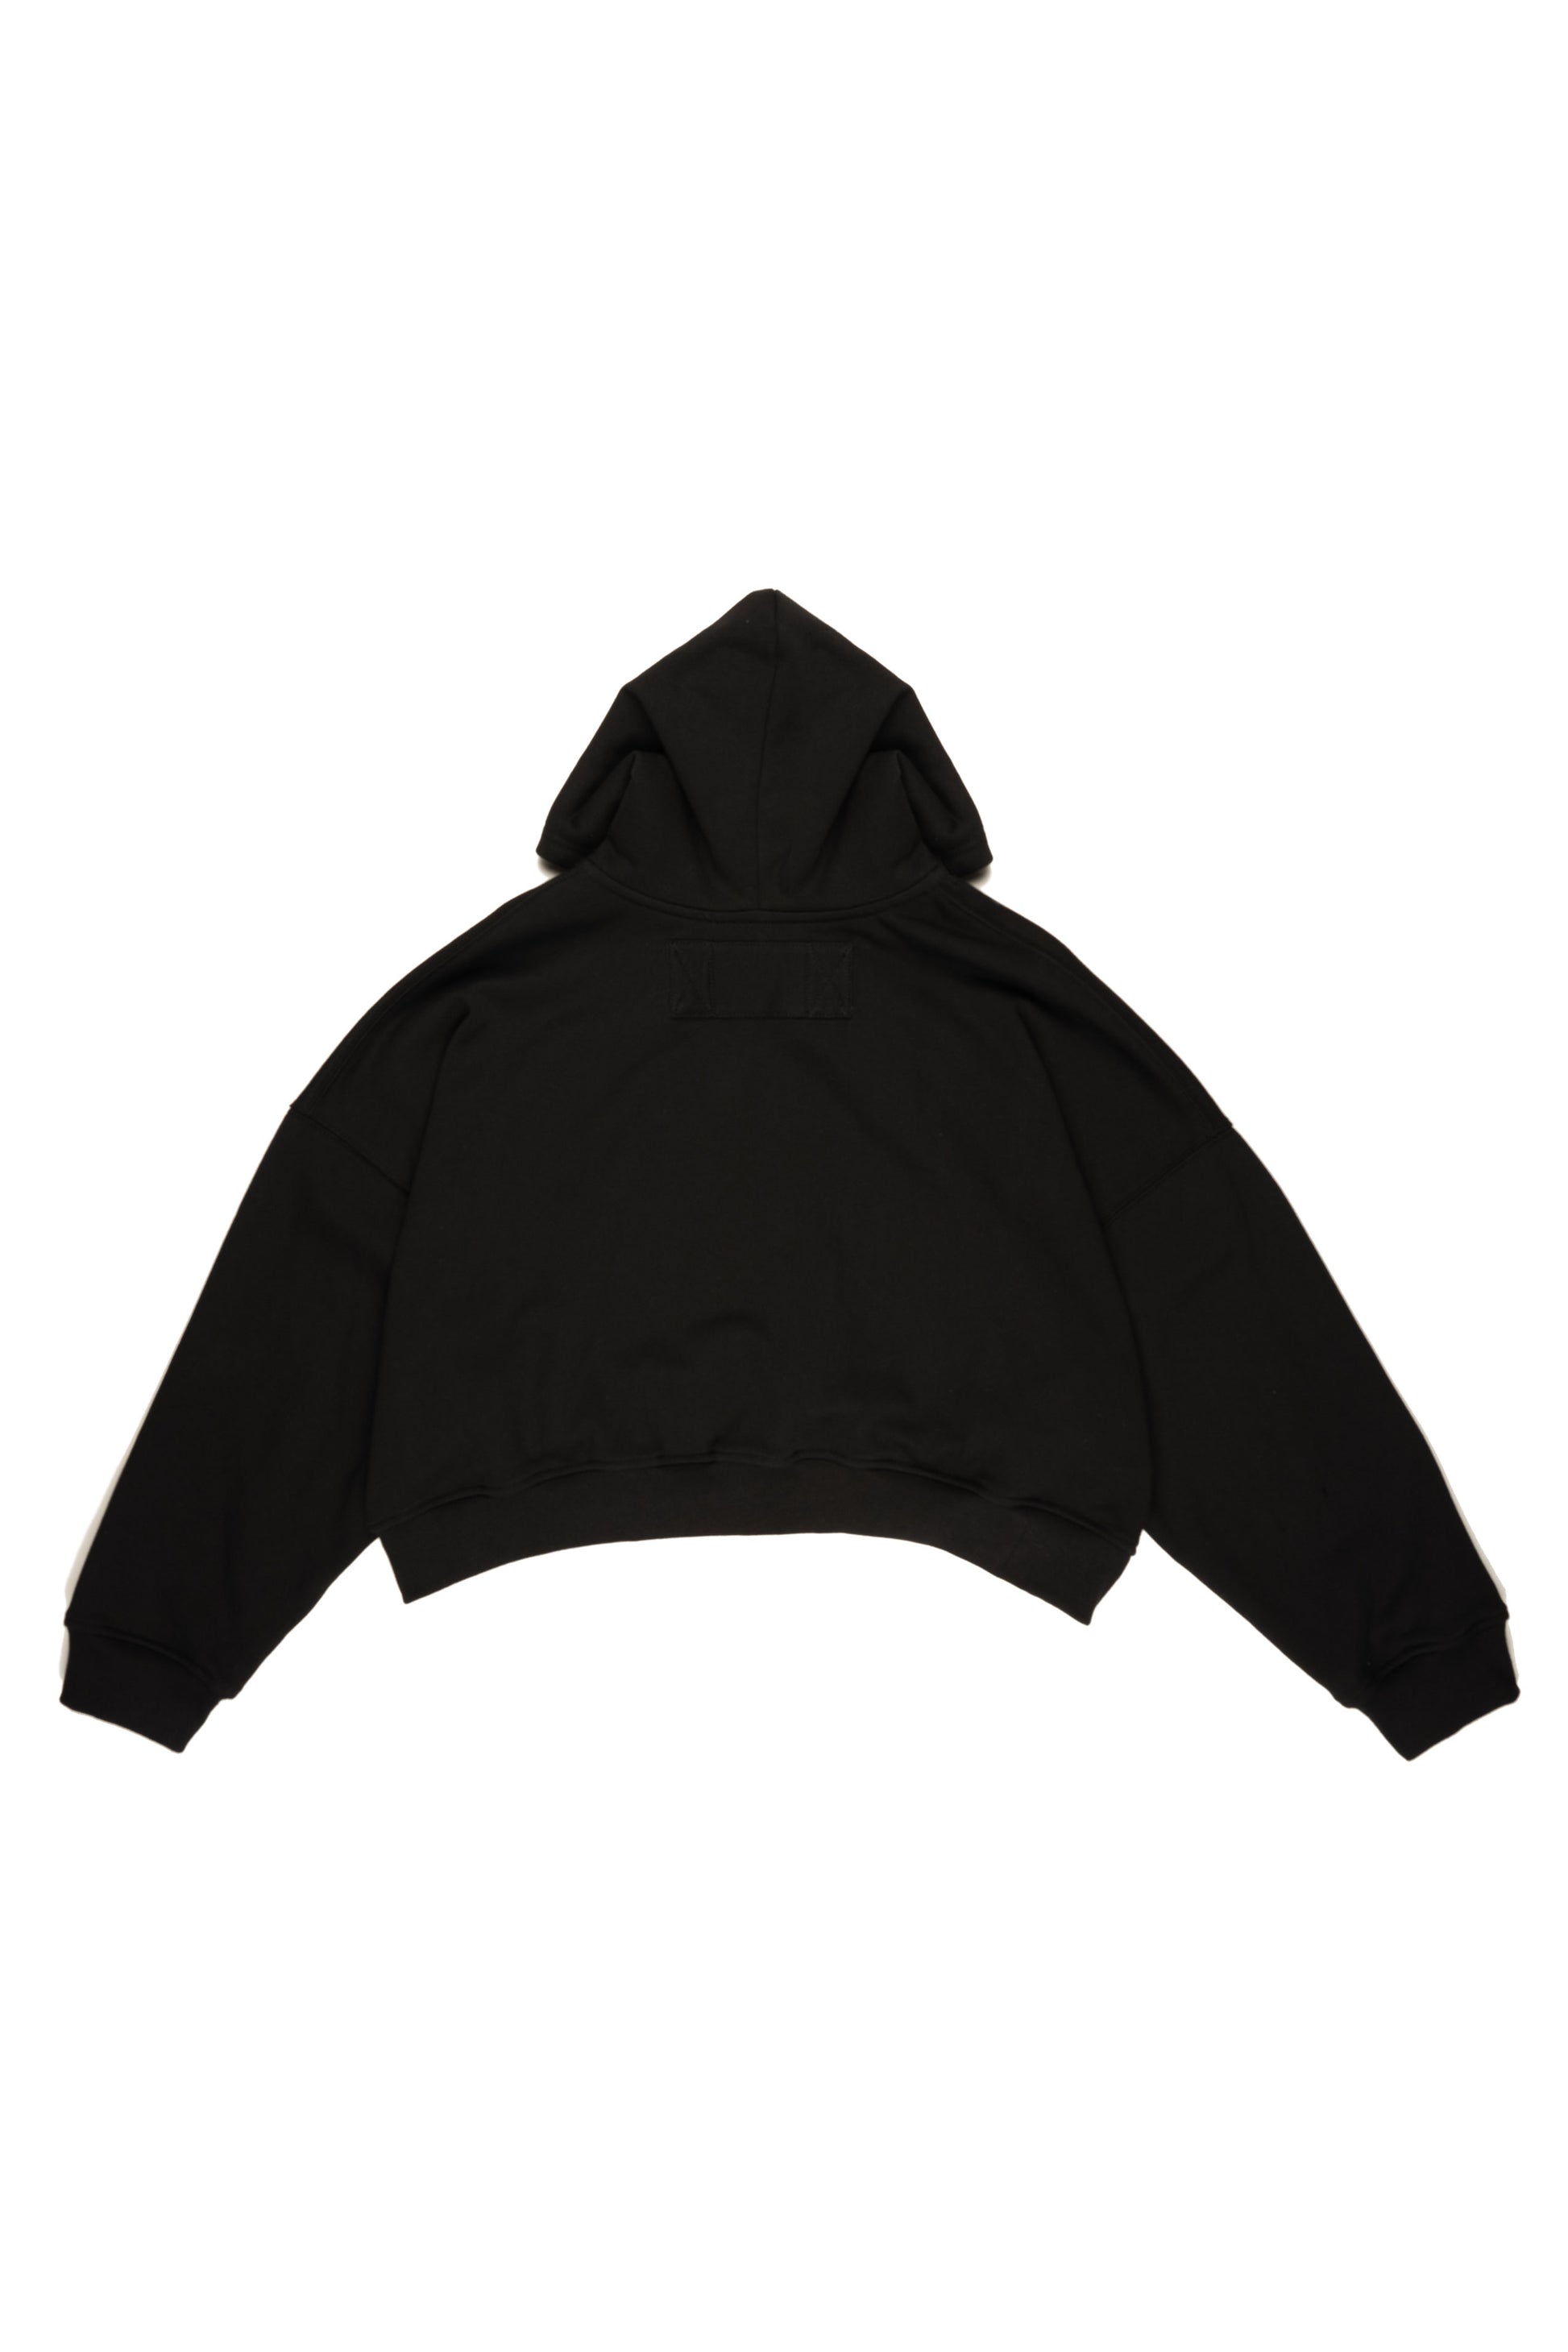 PARAGON BLACK CROPPED HOODIE w THUMBHOLES Sz Small LIKE NEW - clothing &  accessories - by owner - apparel sale 